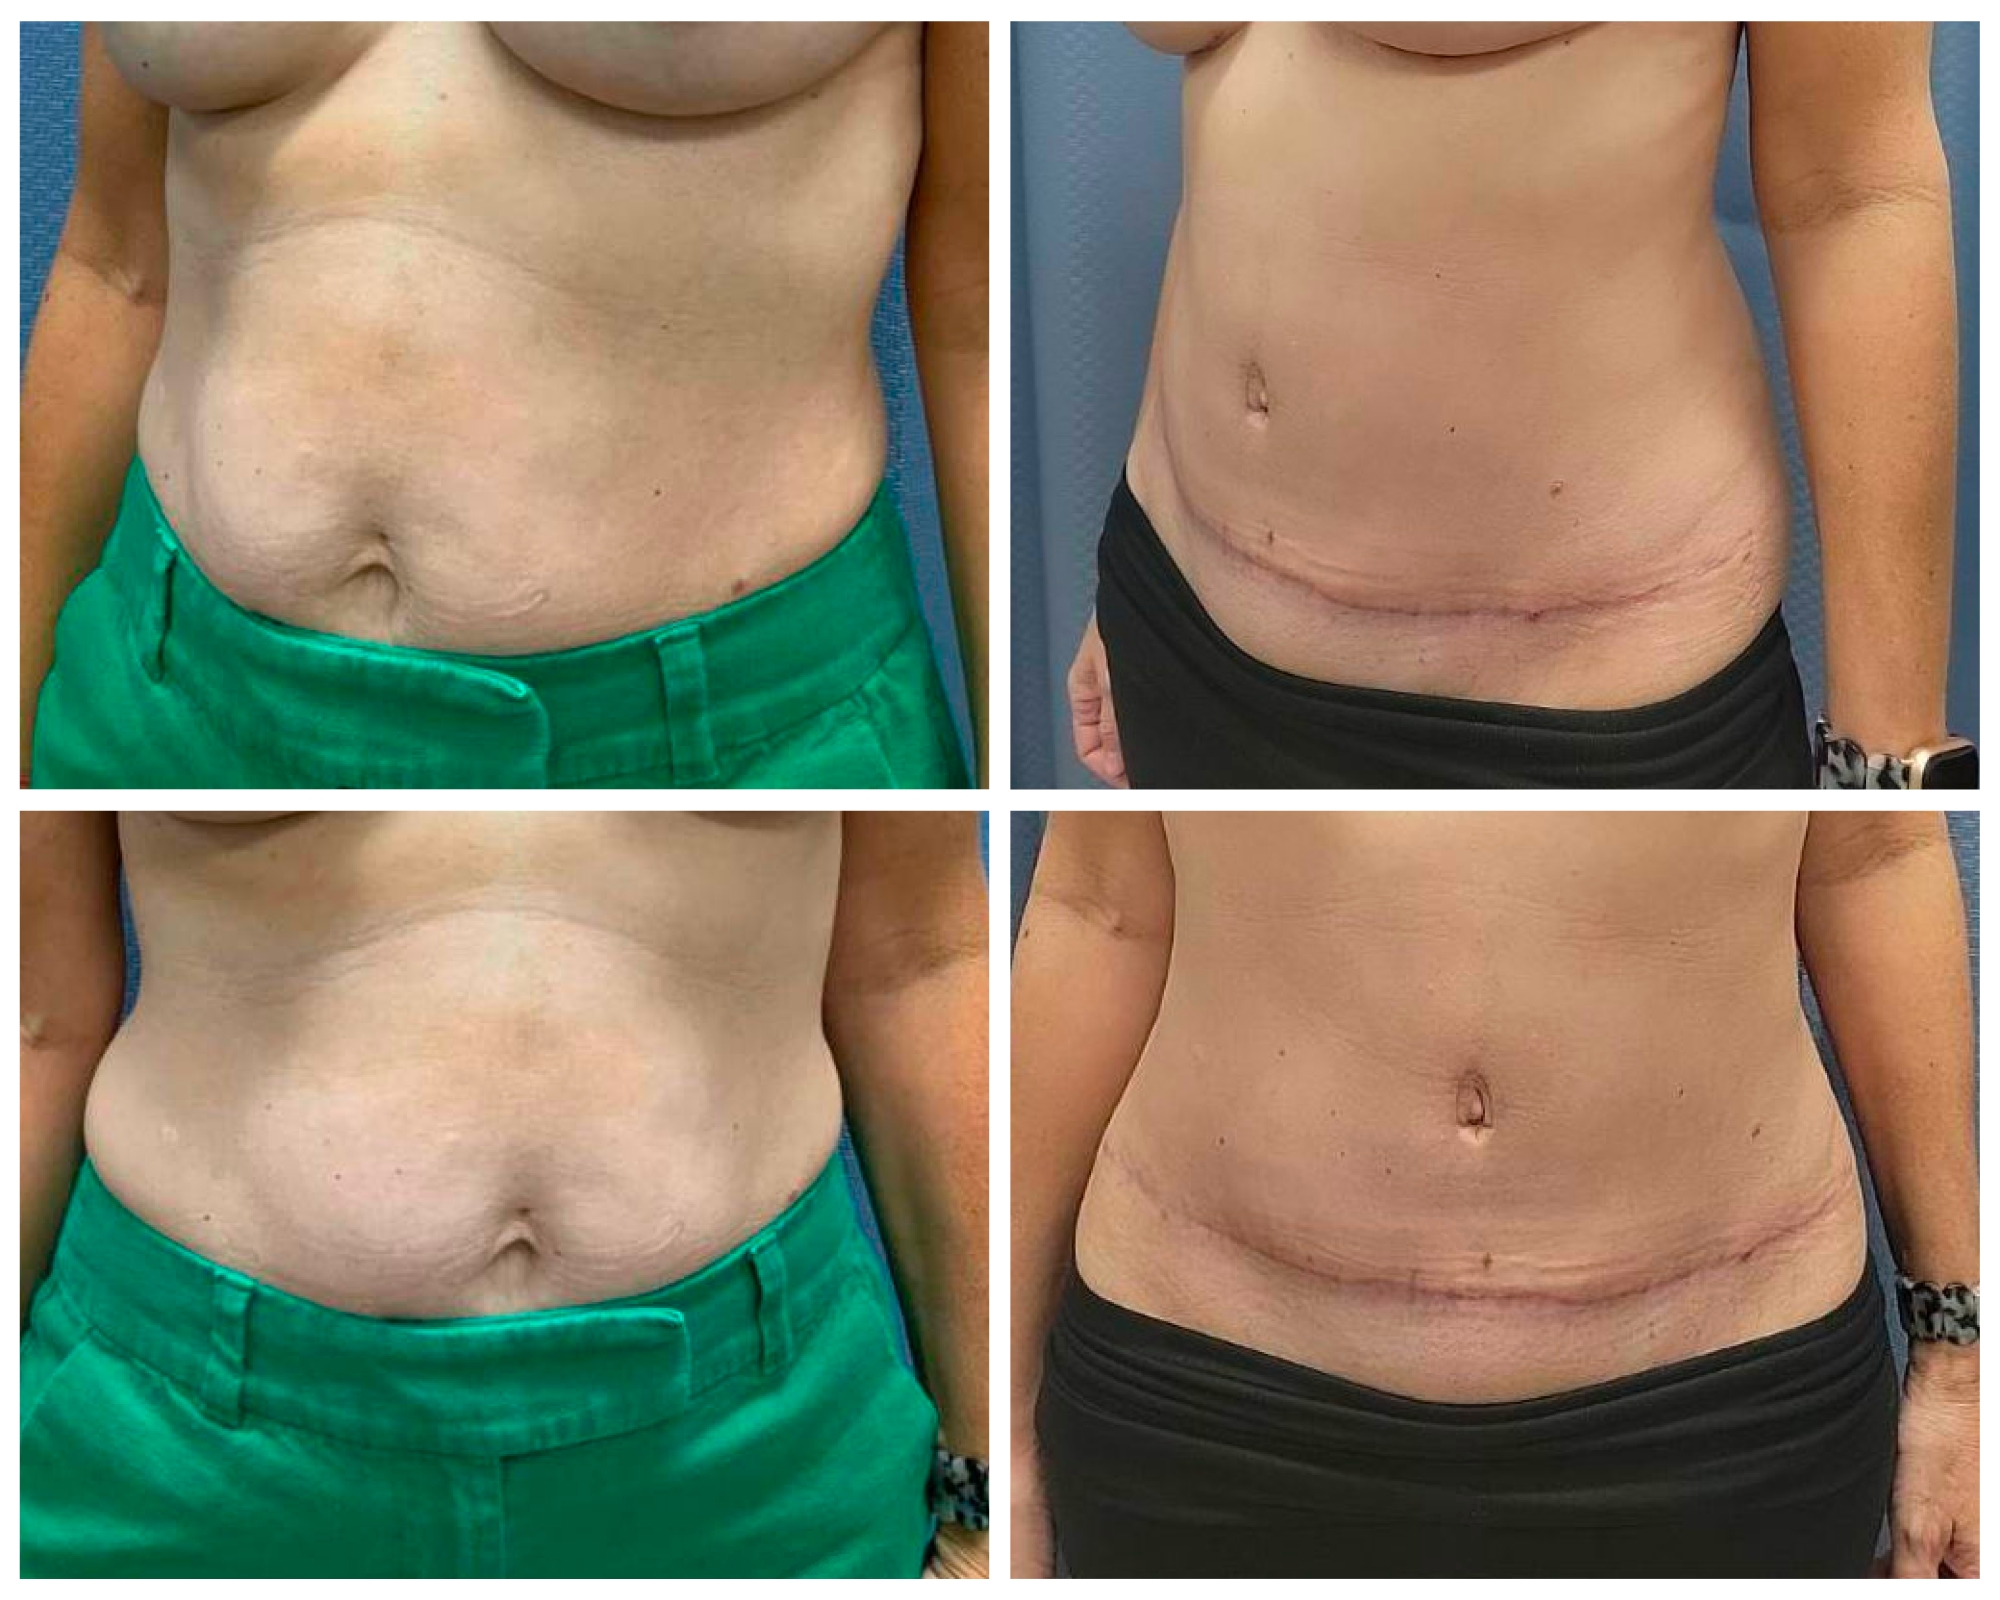 Tummy Tuck with implant based reconstruction